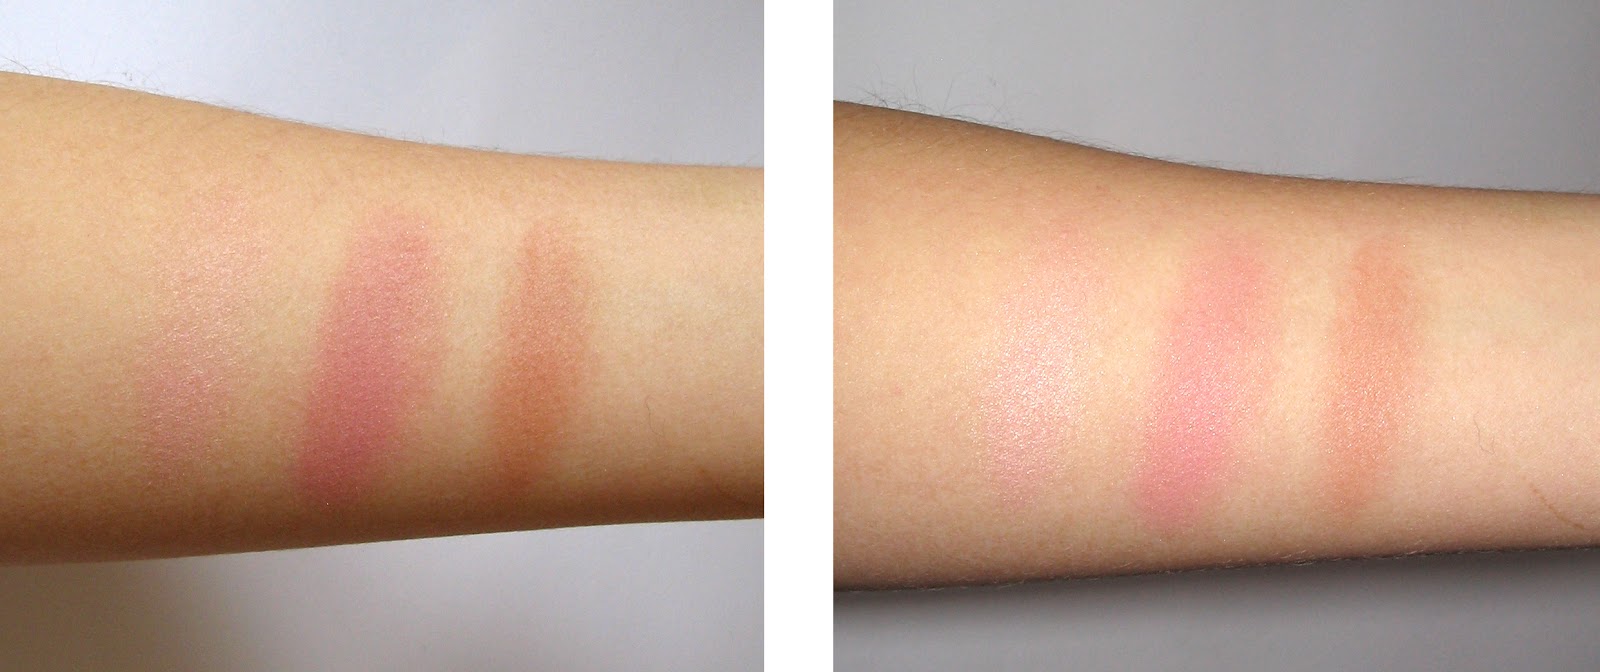 W7 Candy Floss, Africa and Rimmel Smoked Oyster Swatches